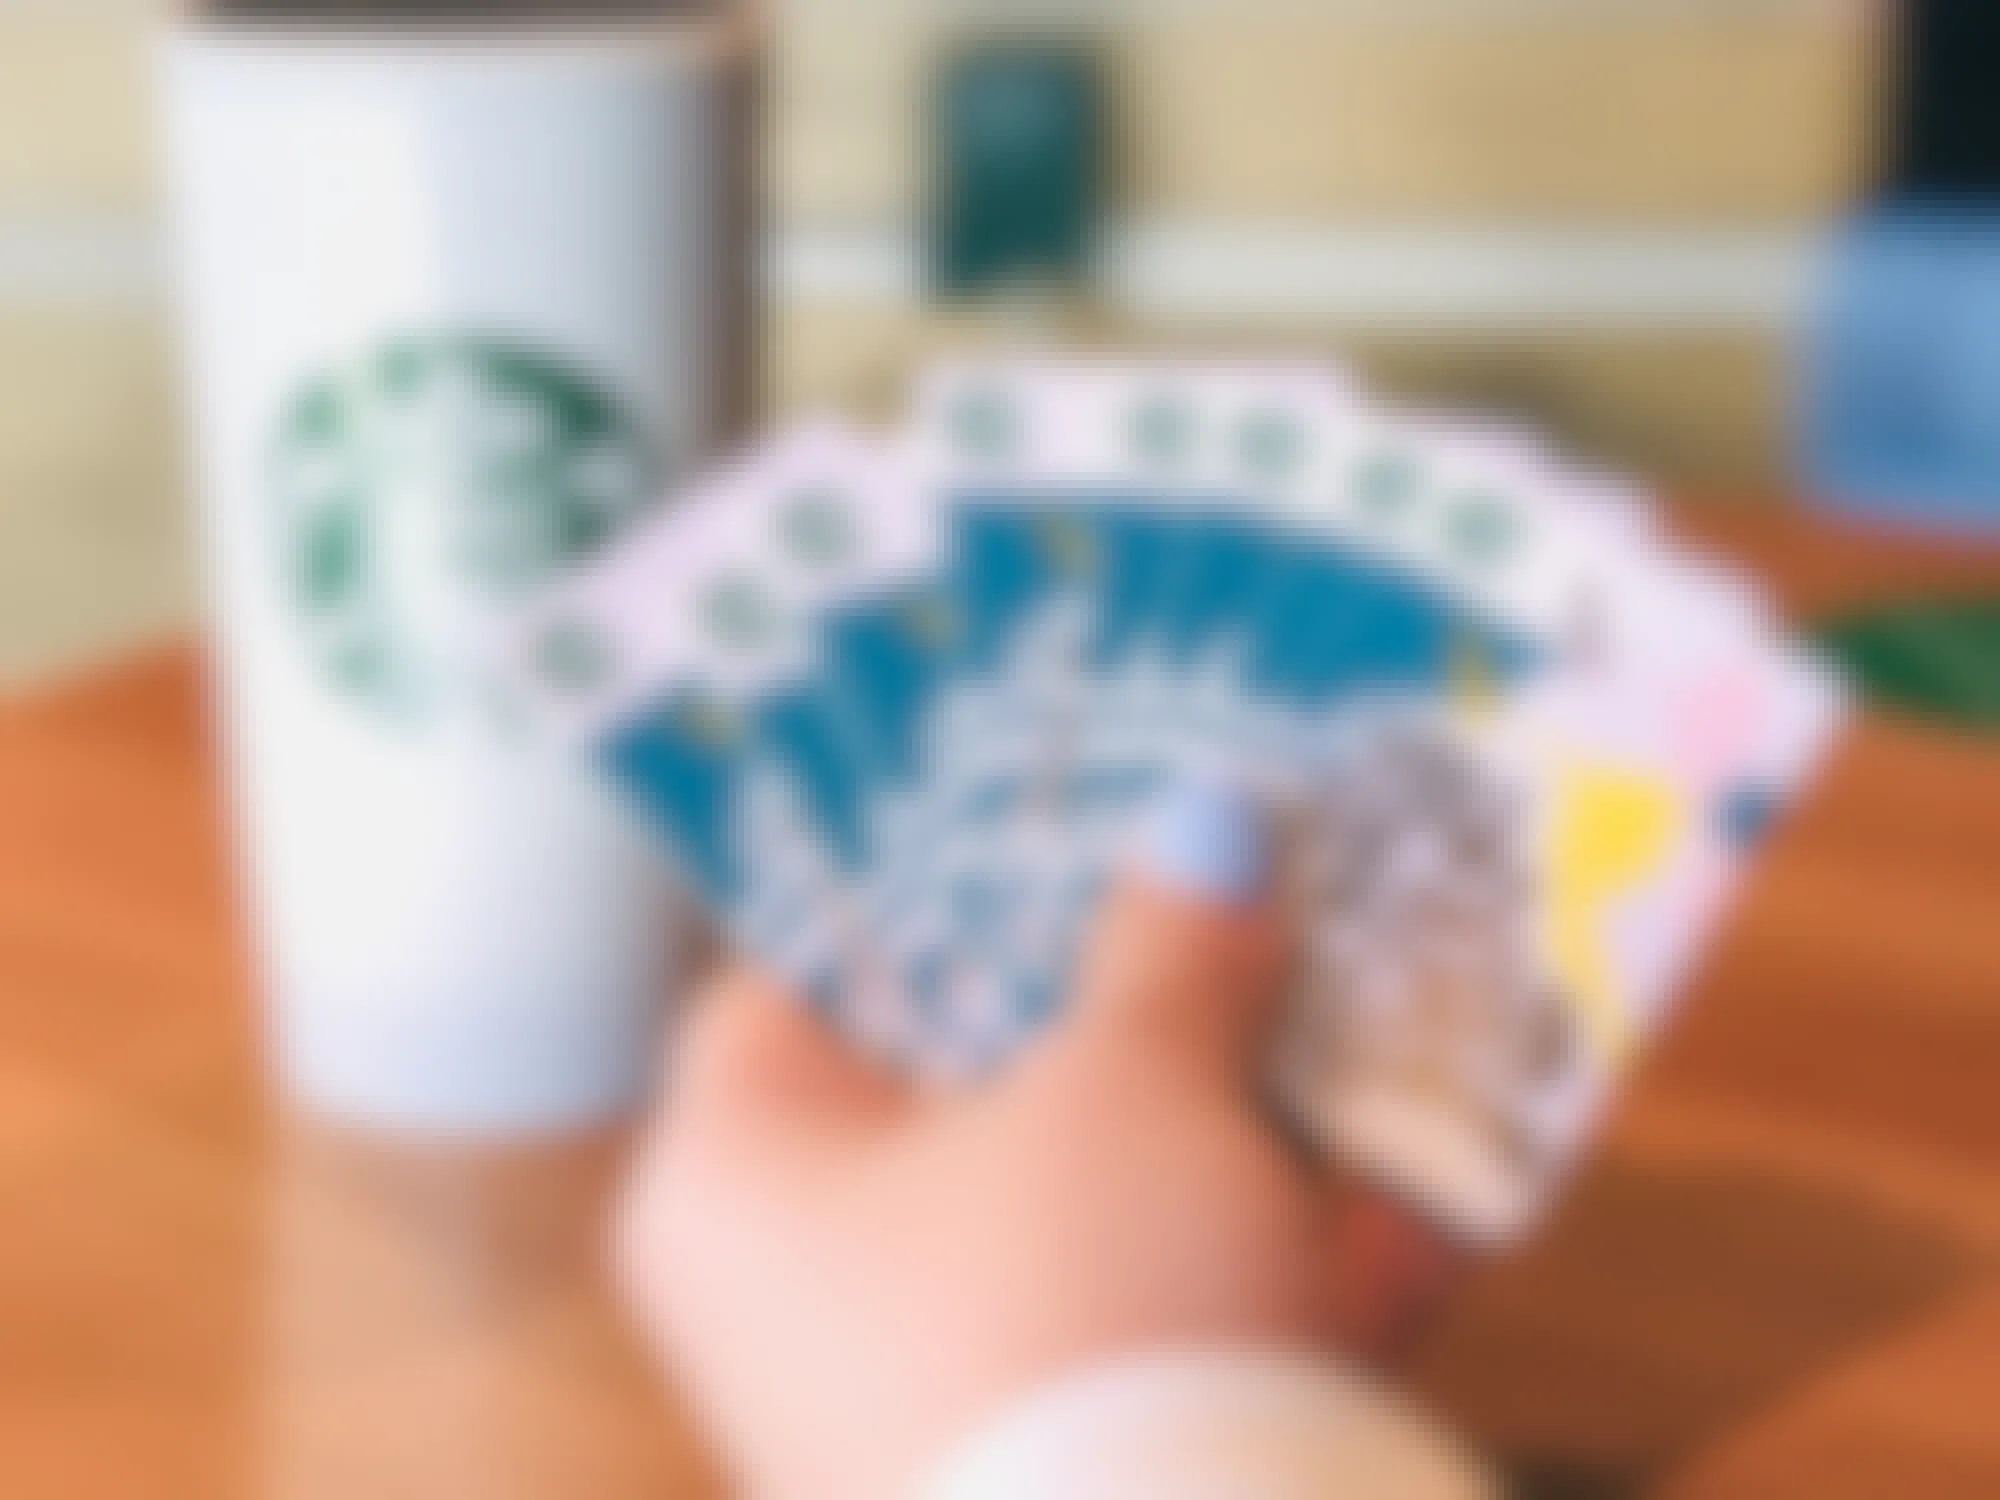 Someone holding a fan of gift cards in front of a starbucks cup